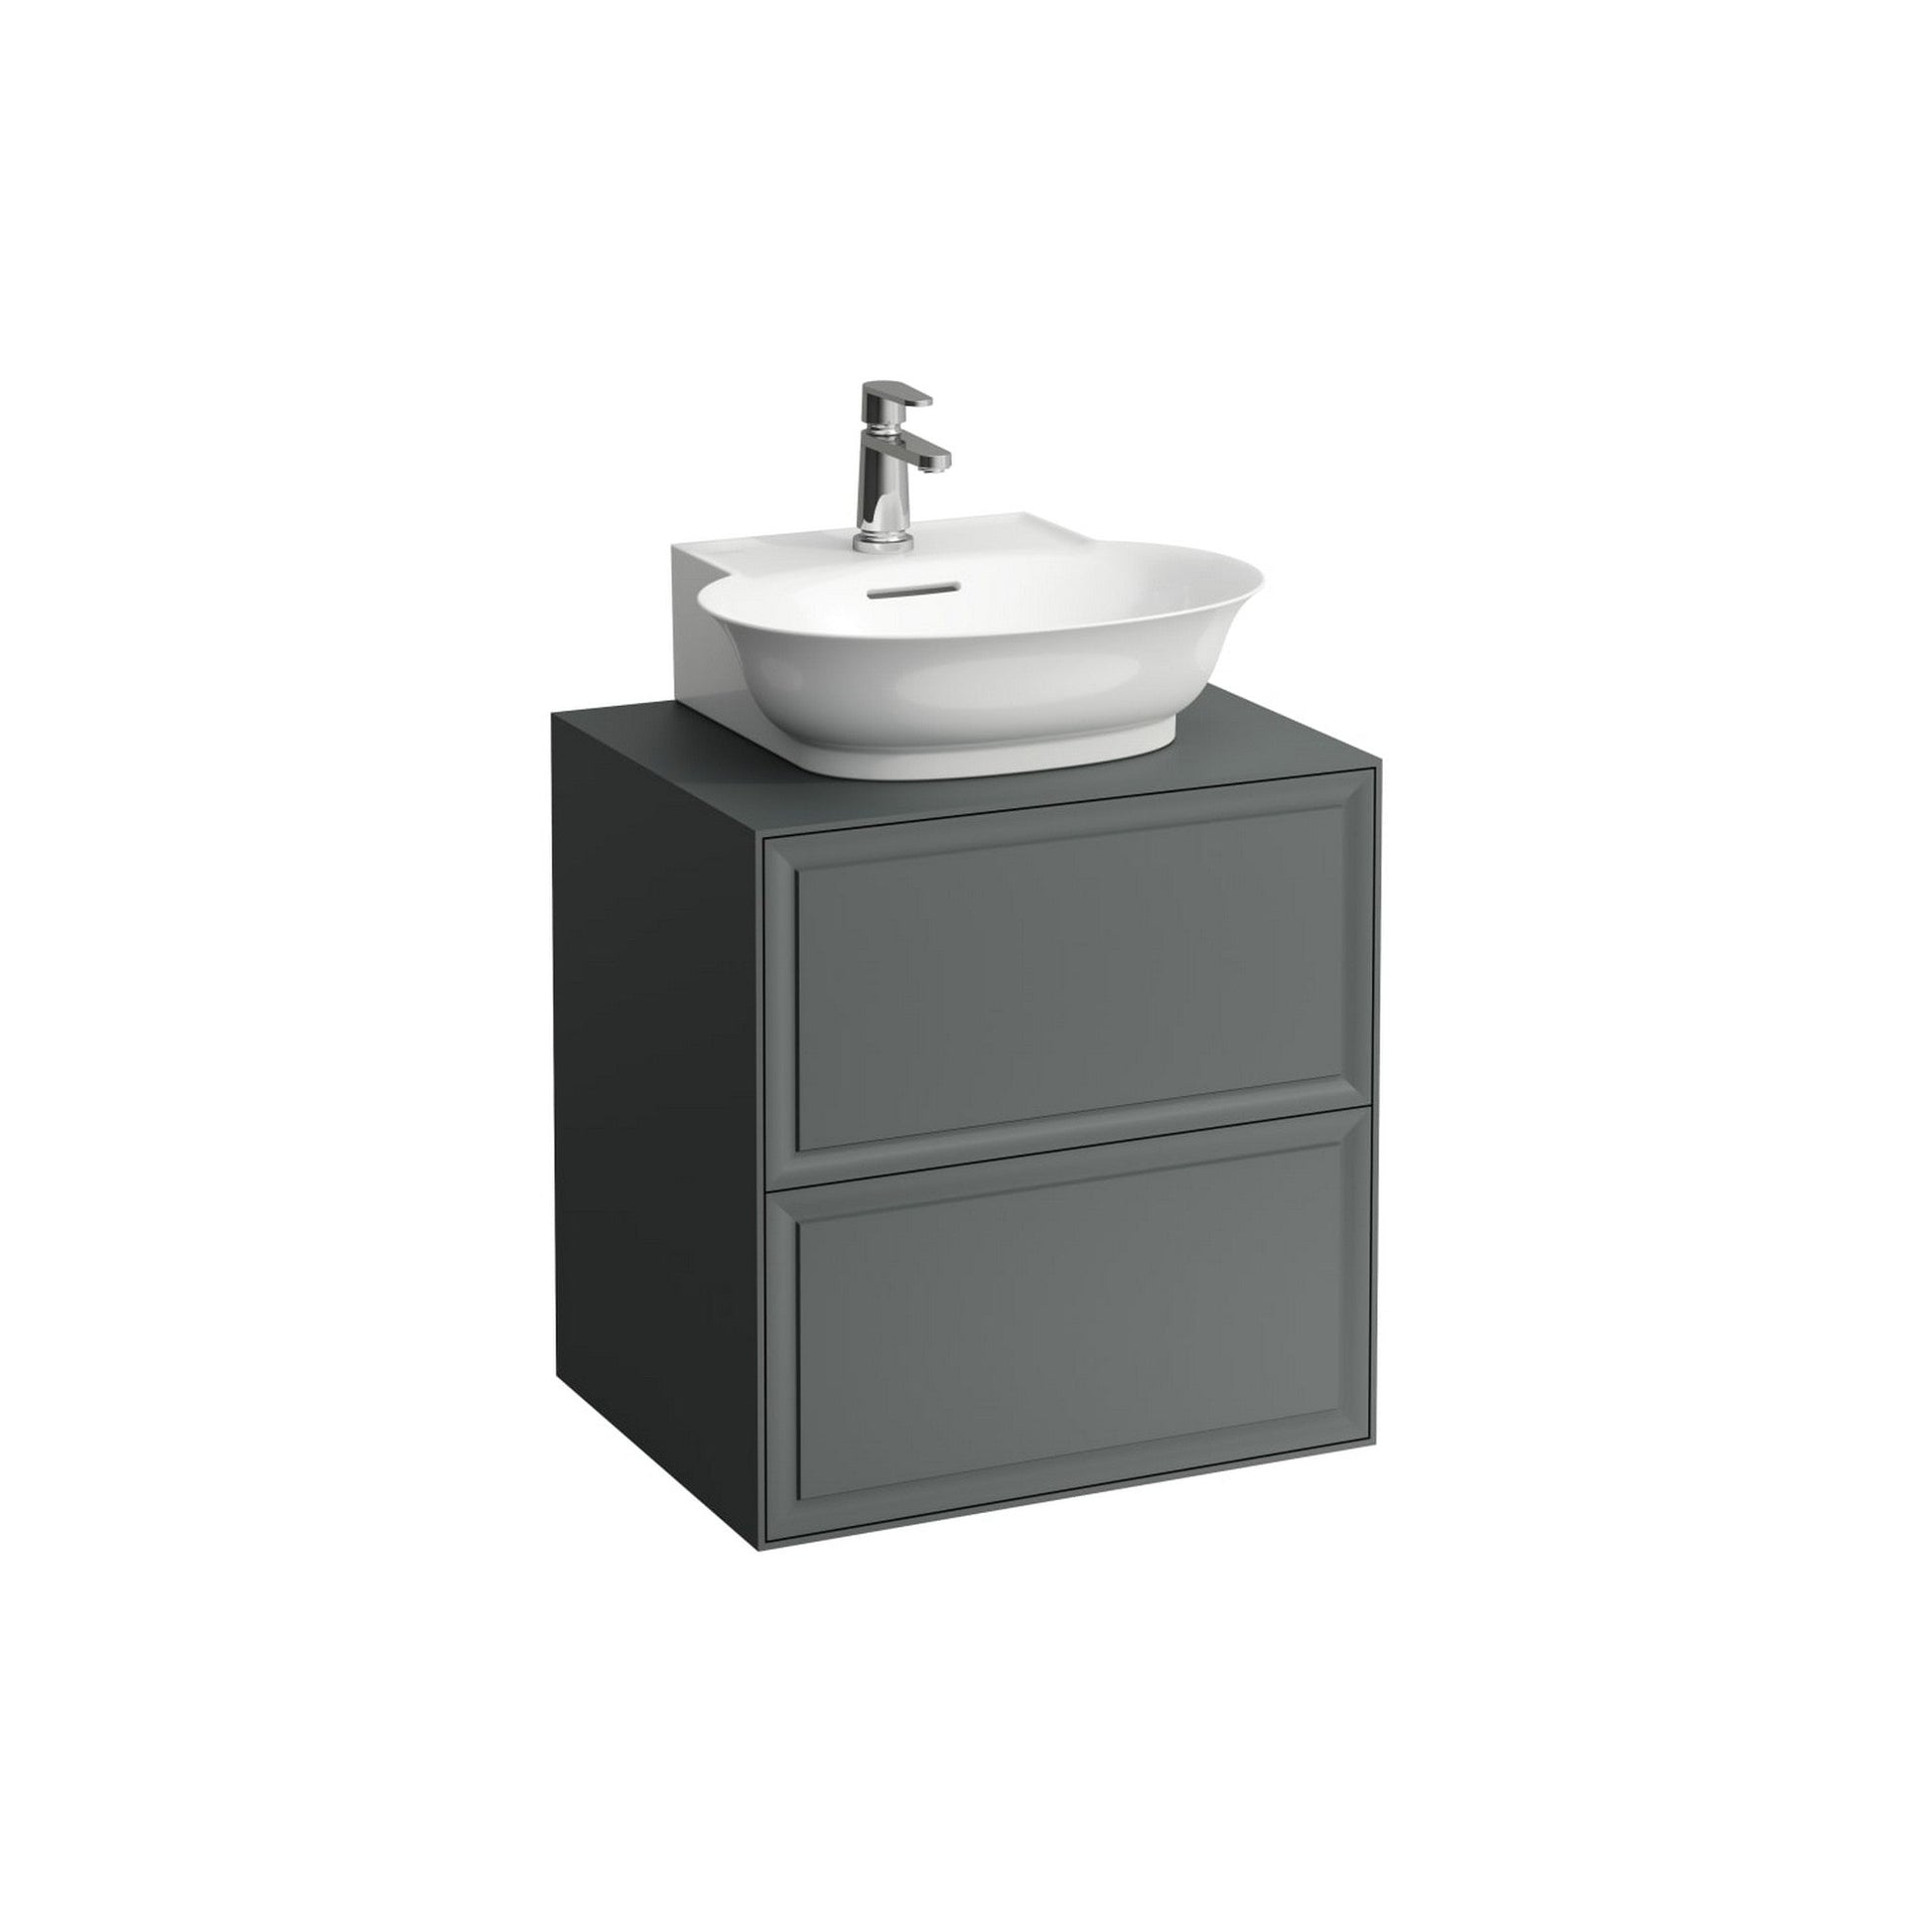 Laufen New Classic 23" 2-Drawer Traffic Gray Wall-Mounted Vanity for New Classic Bathroom Sink Model: H816852